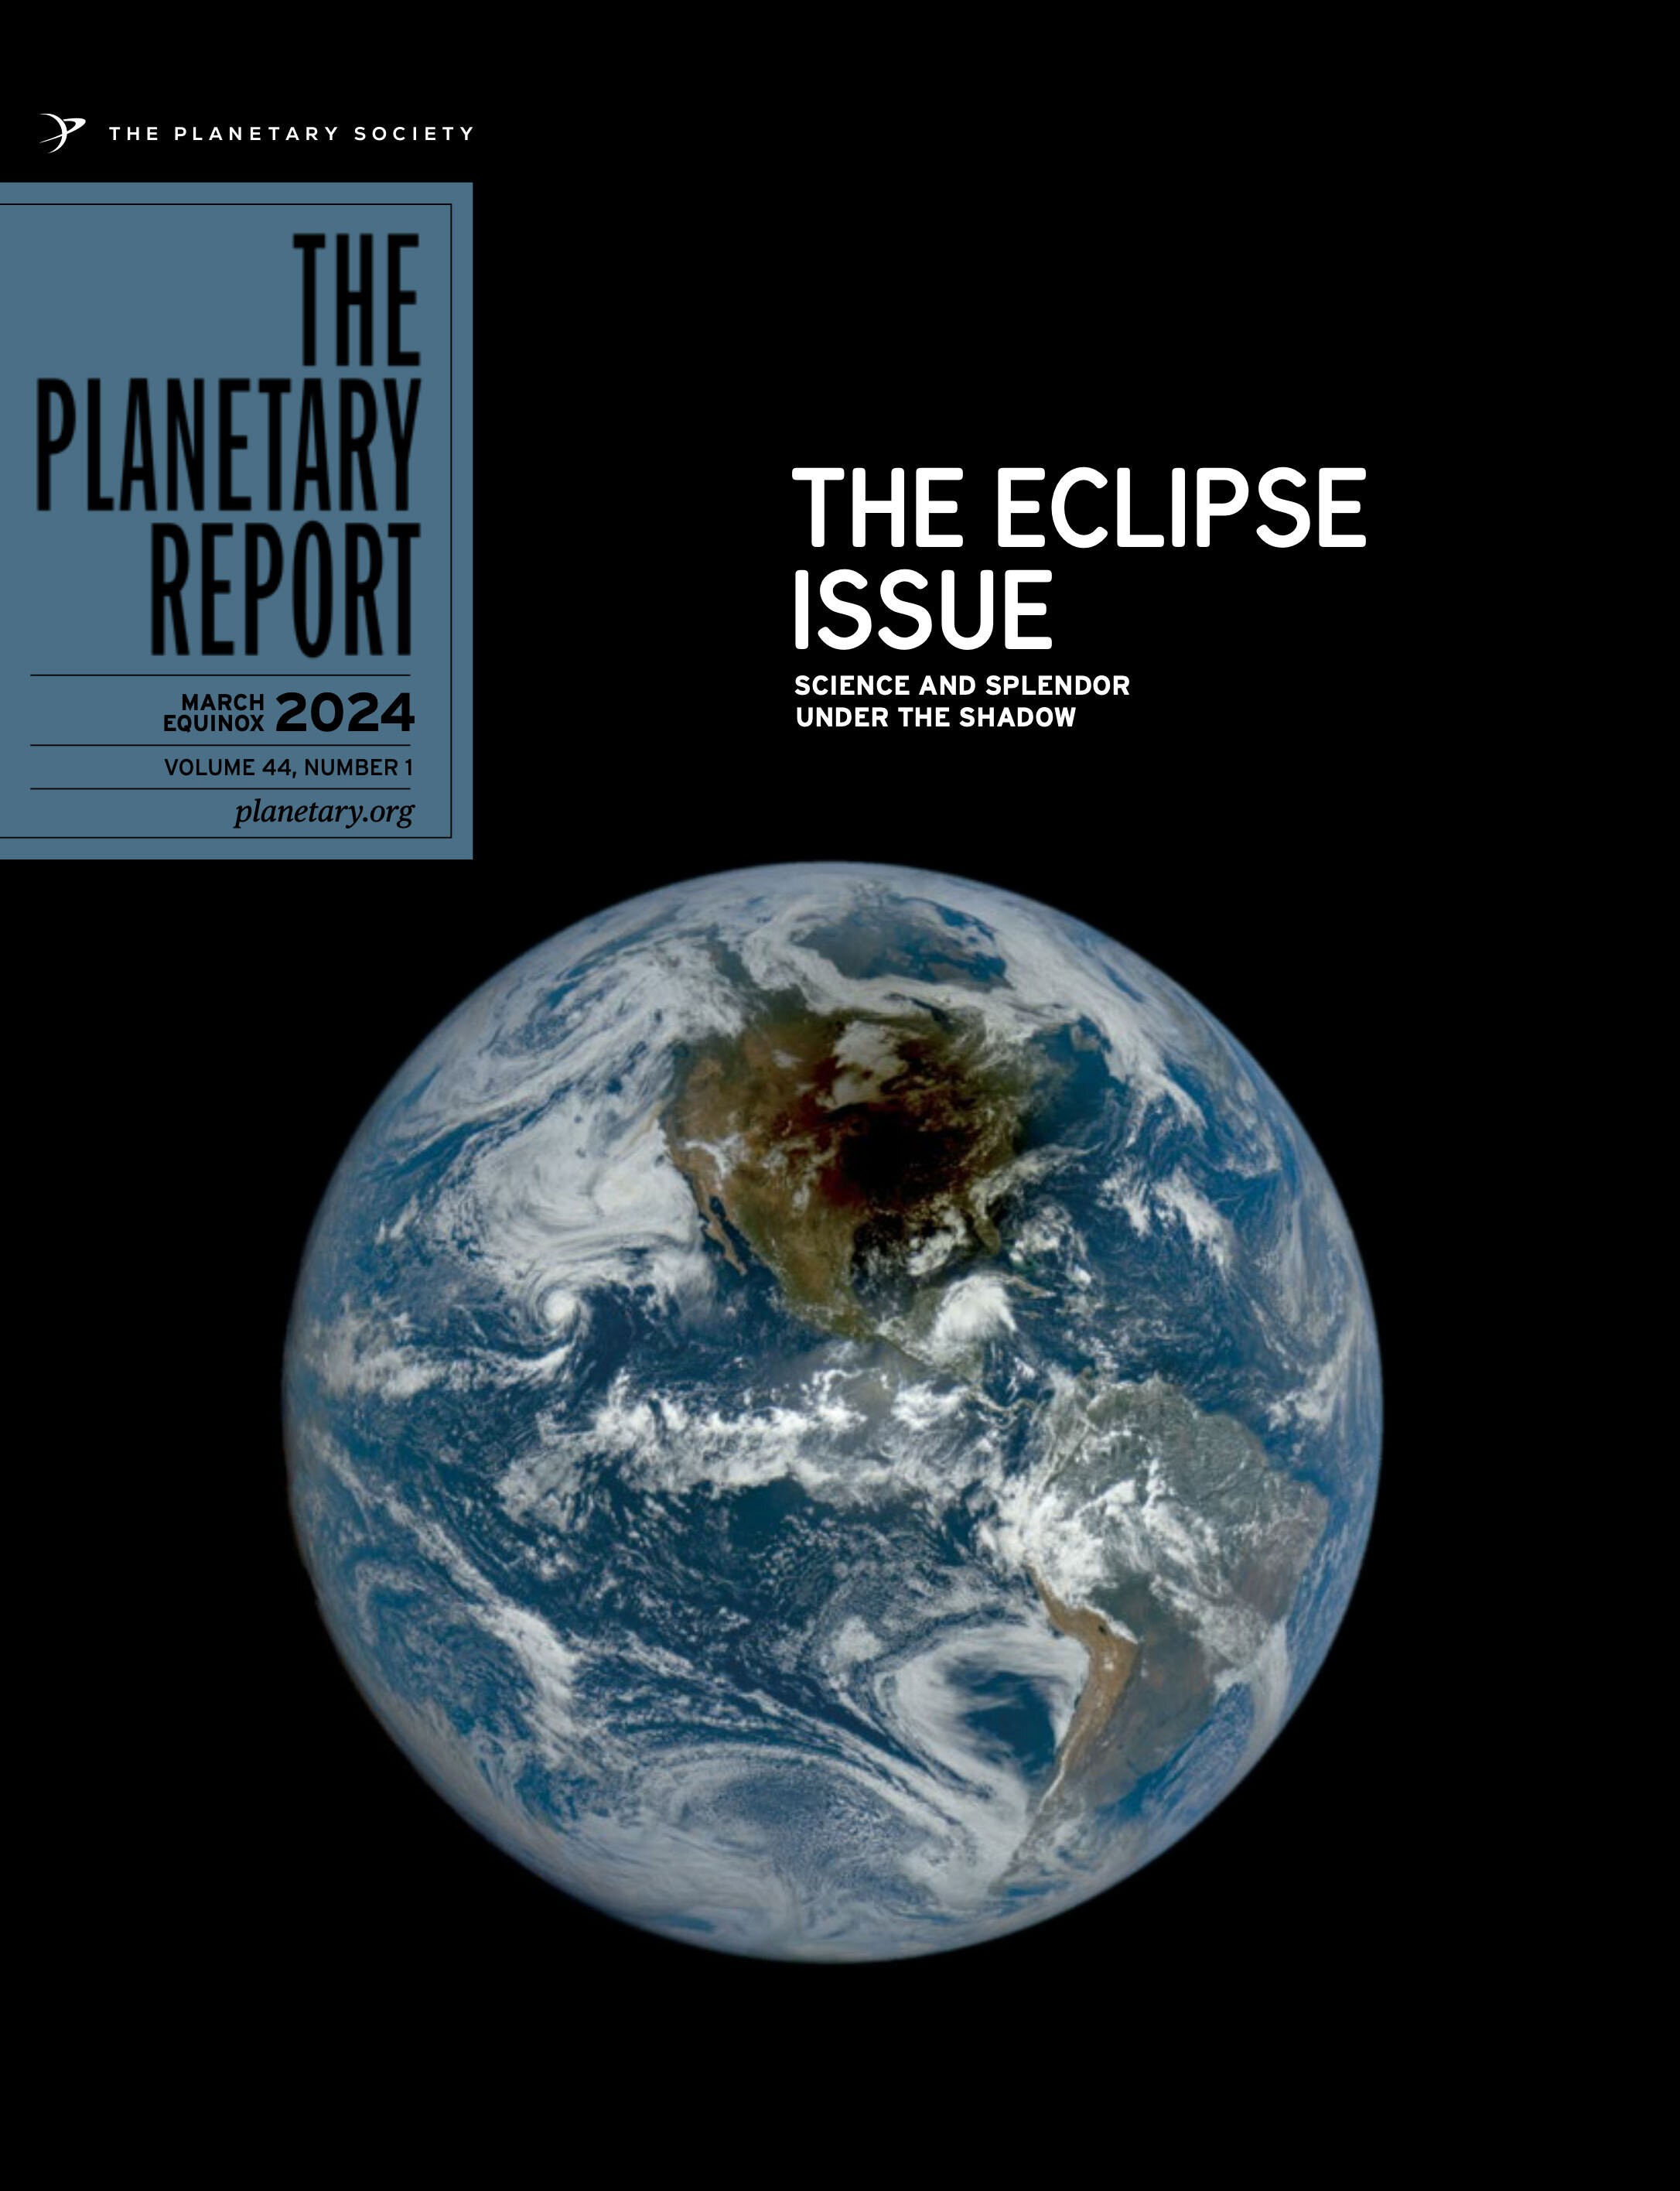 March equinox 2024 TPR cover The Society